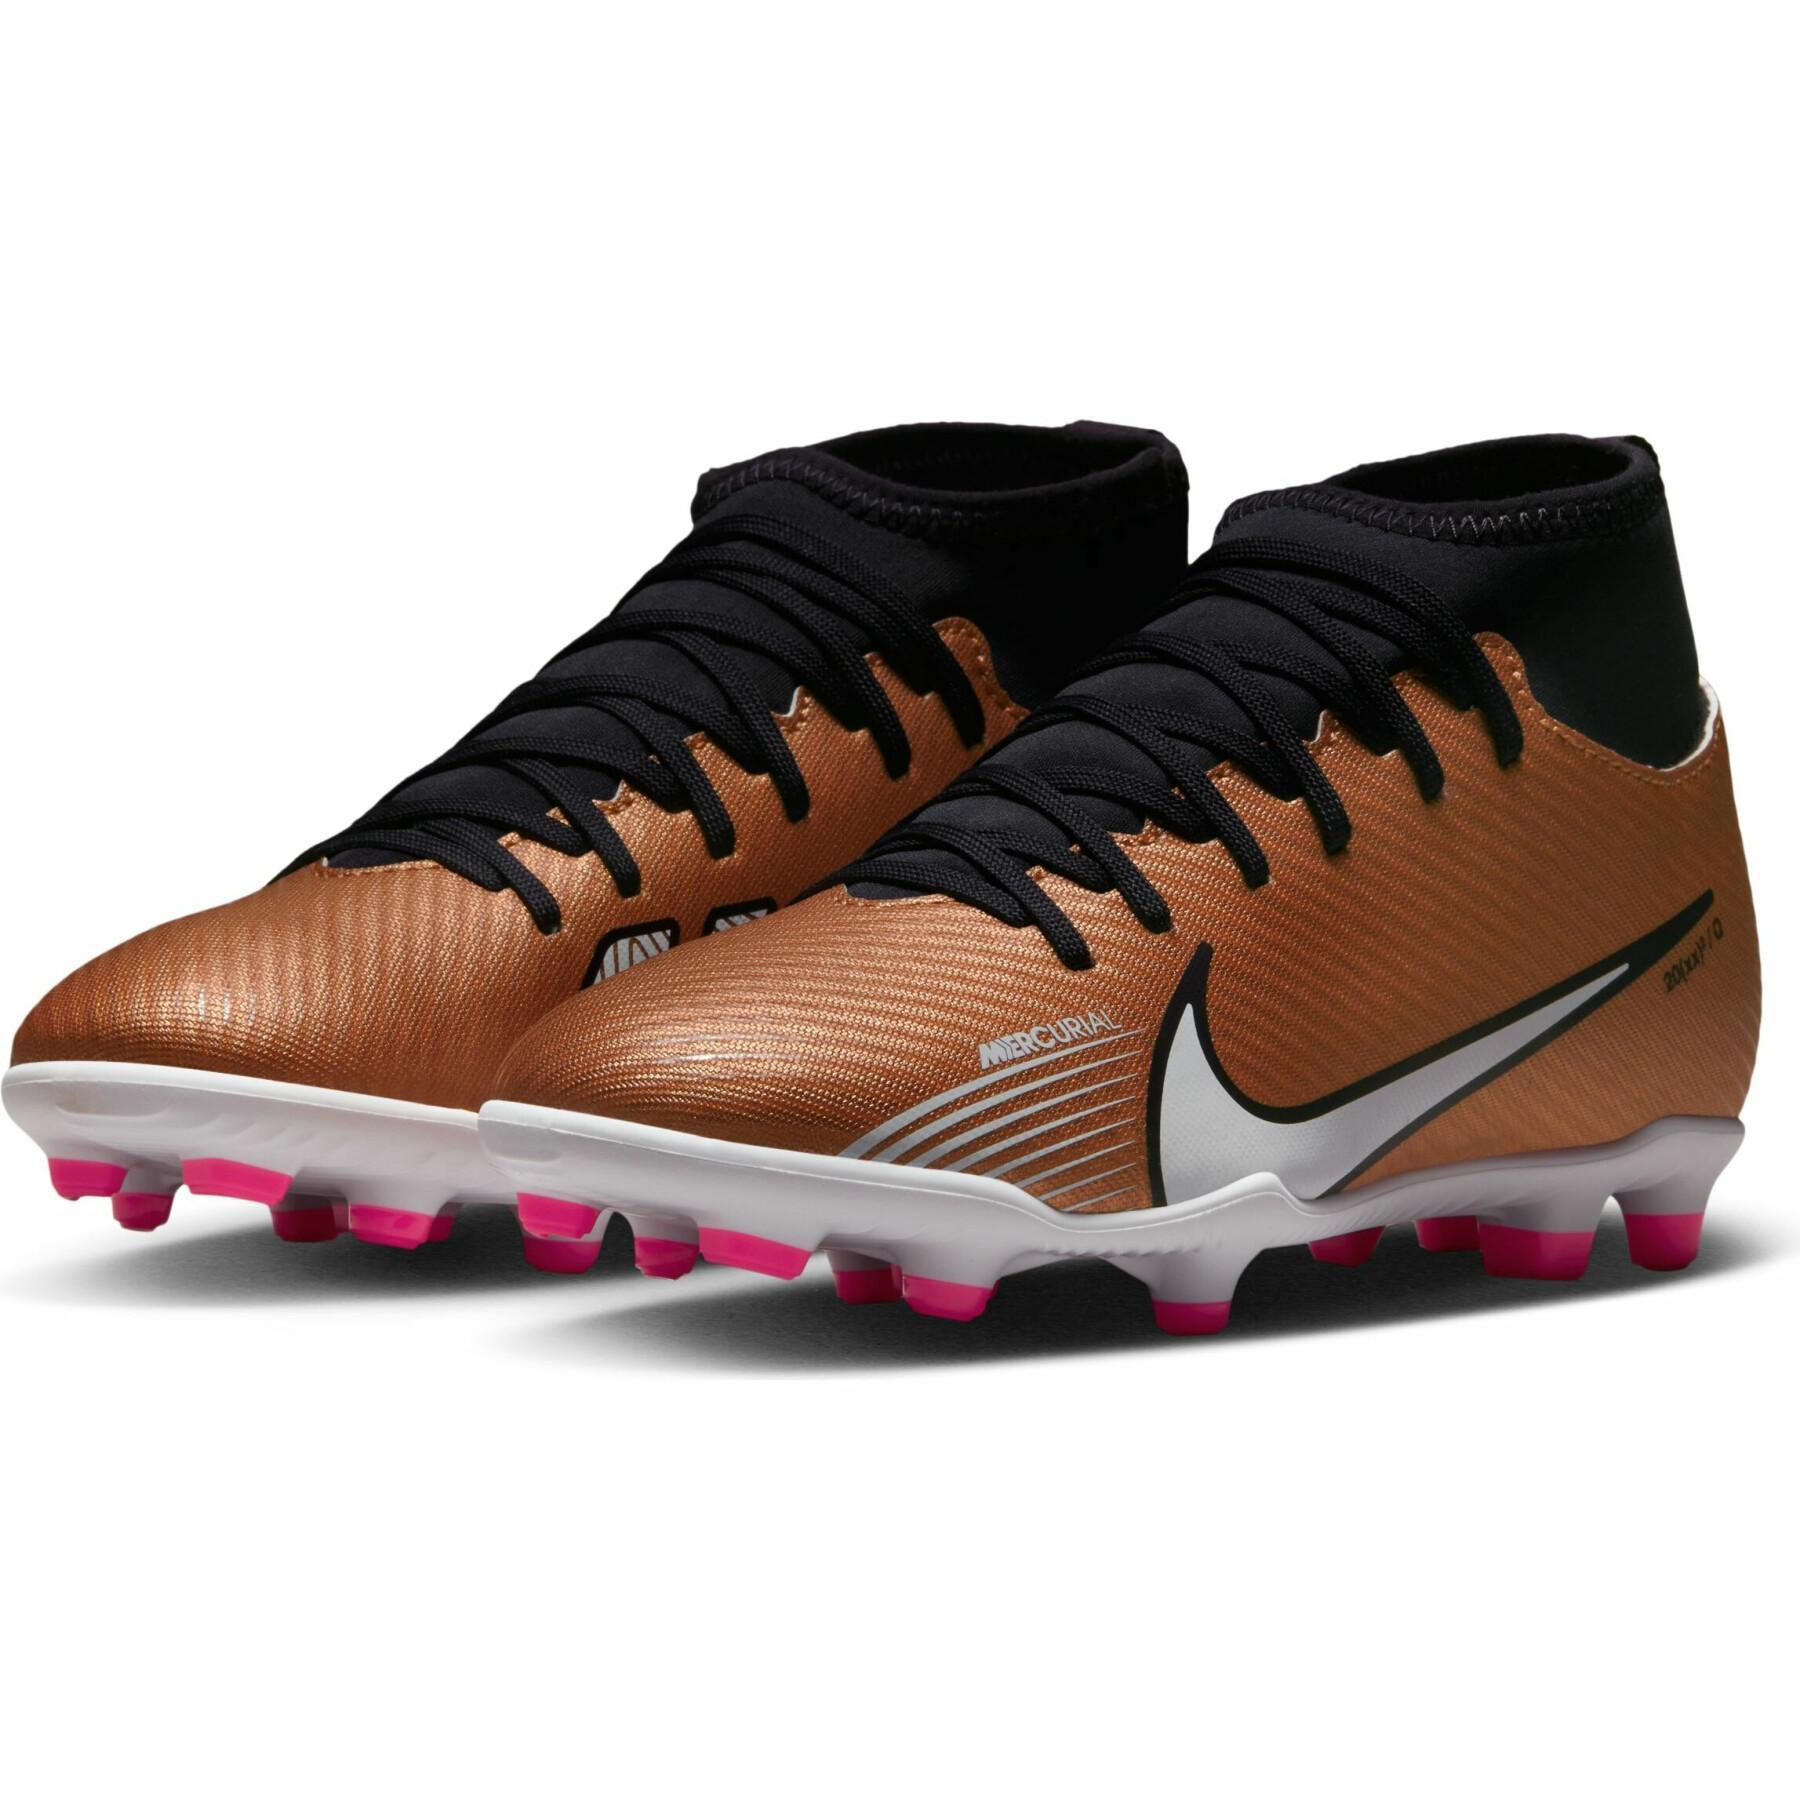 Children's soccer shoes Nike Mercurial Superfly 9 Club FG/MG - Generation Pack